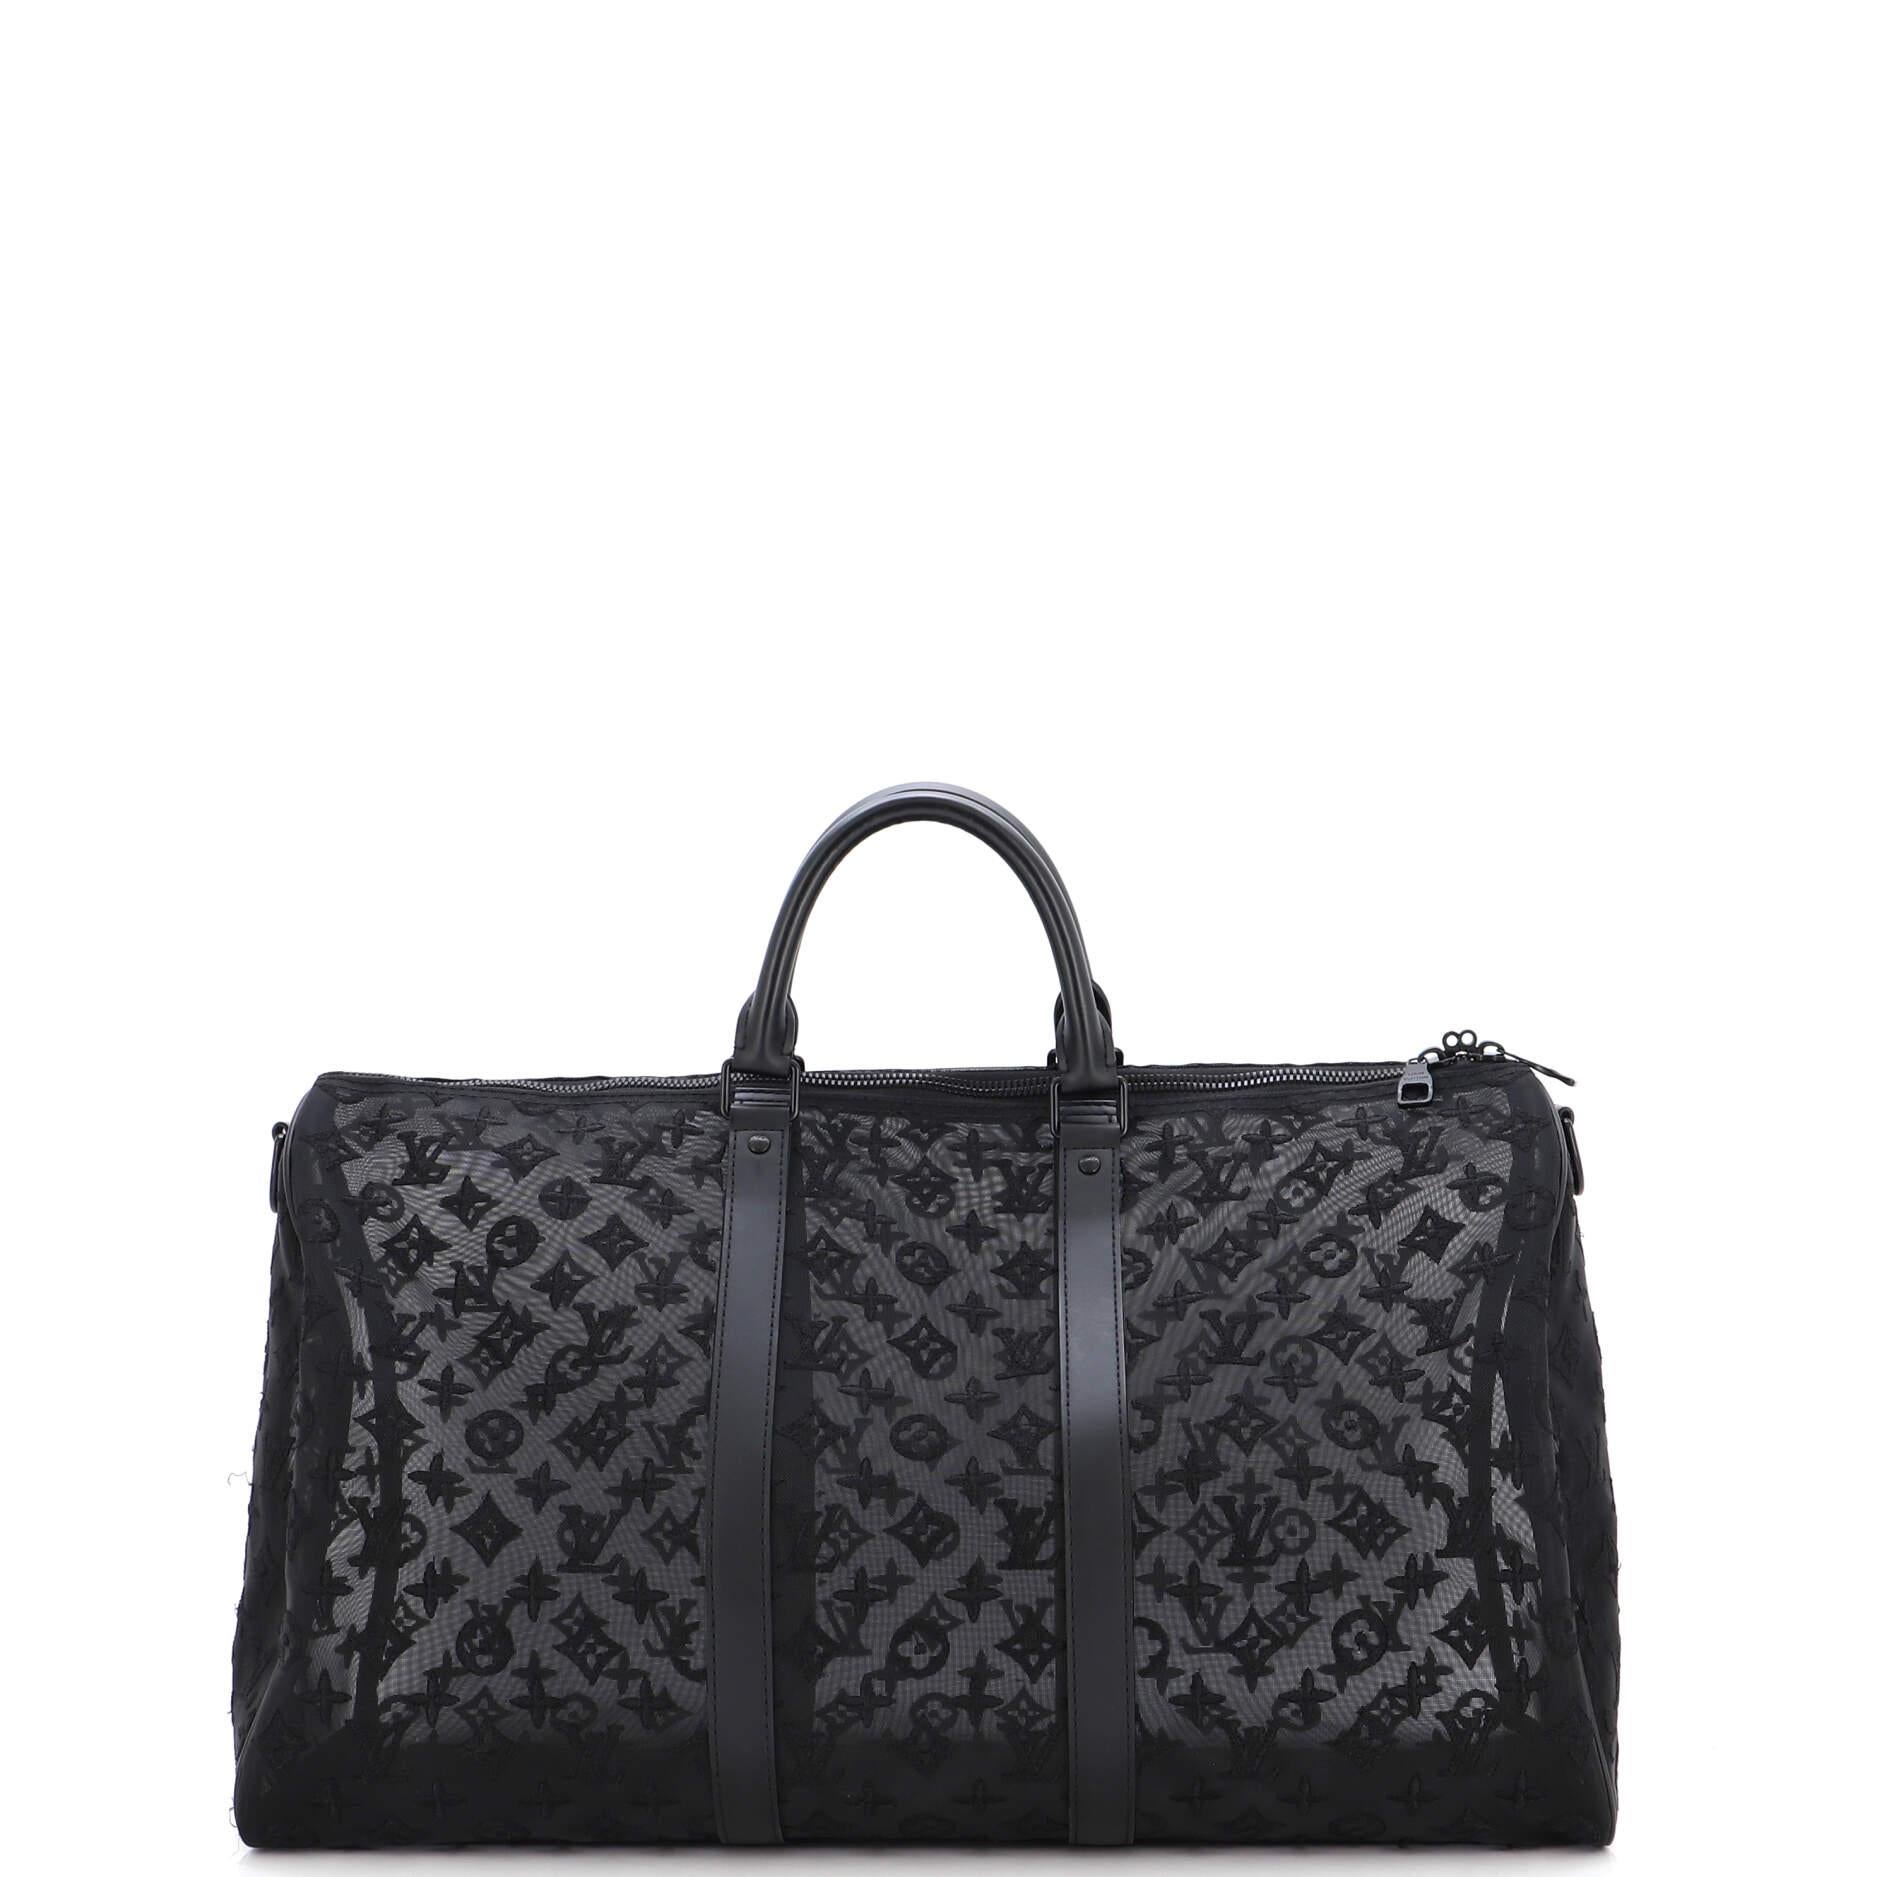 Louis Vuitton Keepall Bandouliere Bag Monogram See Through Mesh 50 In Good Condition For Sale In NY, NY